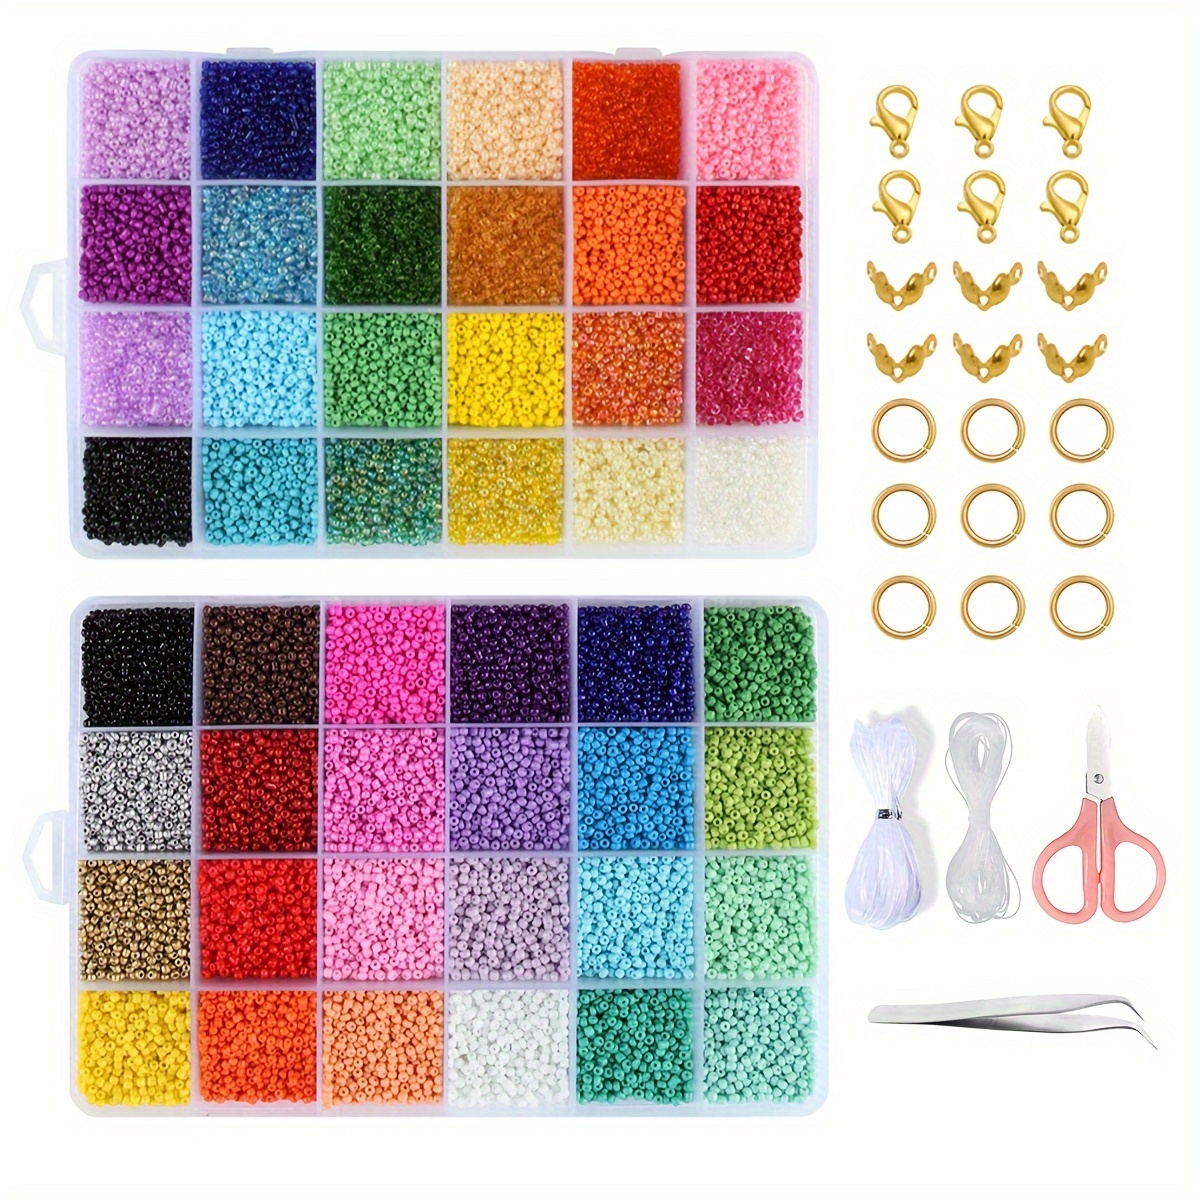 

48 Colors 3mm Glass Beads, Diy Bracelet Earrings Necklace Jewelry Making Accessories